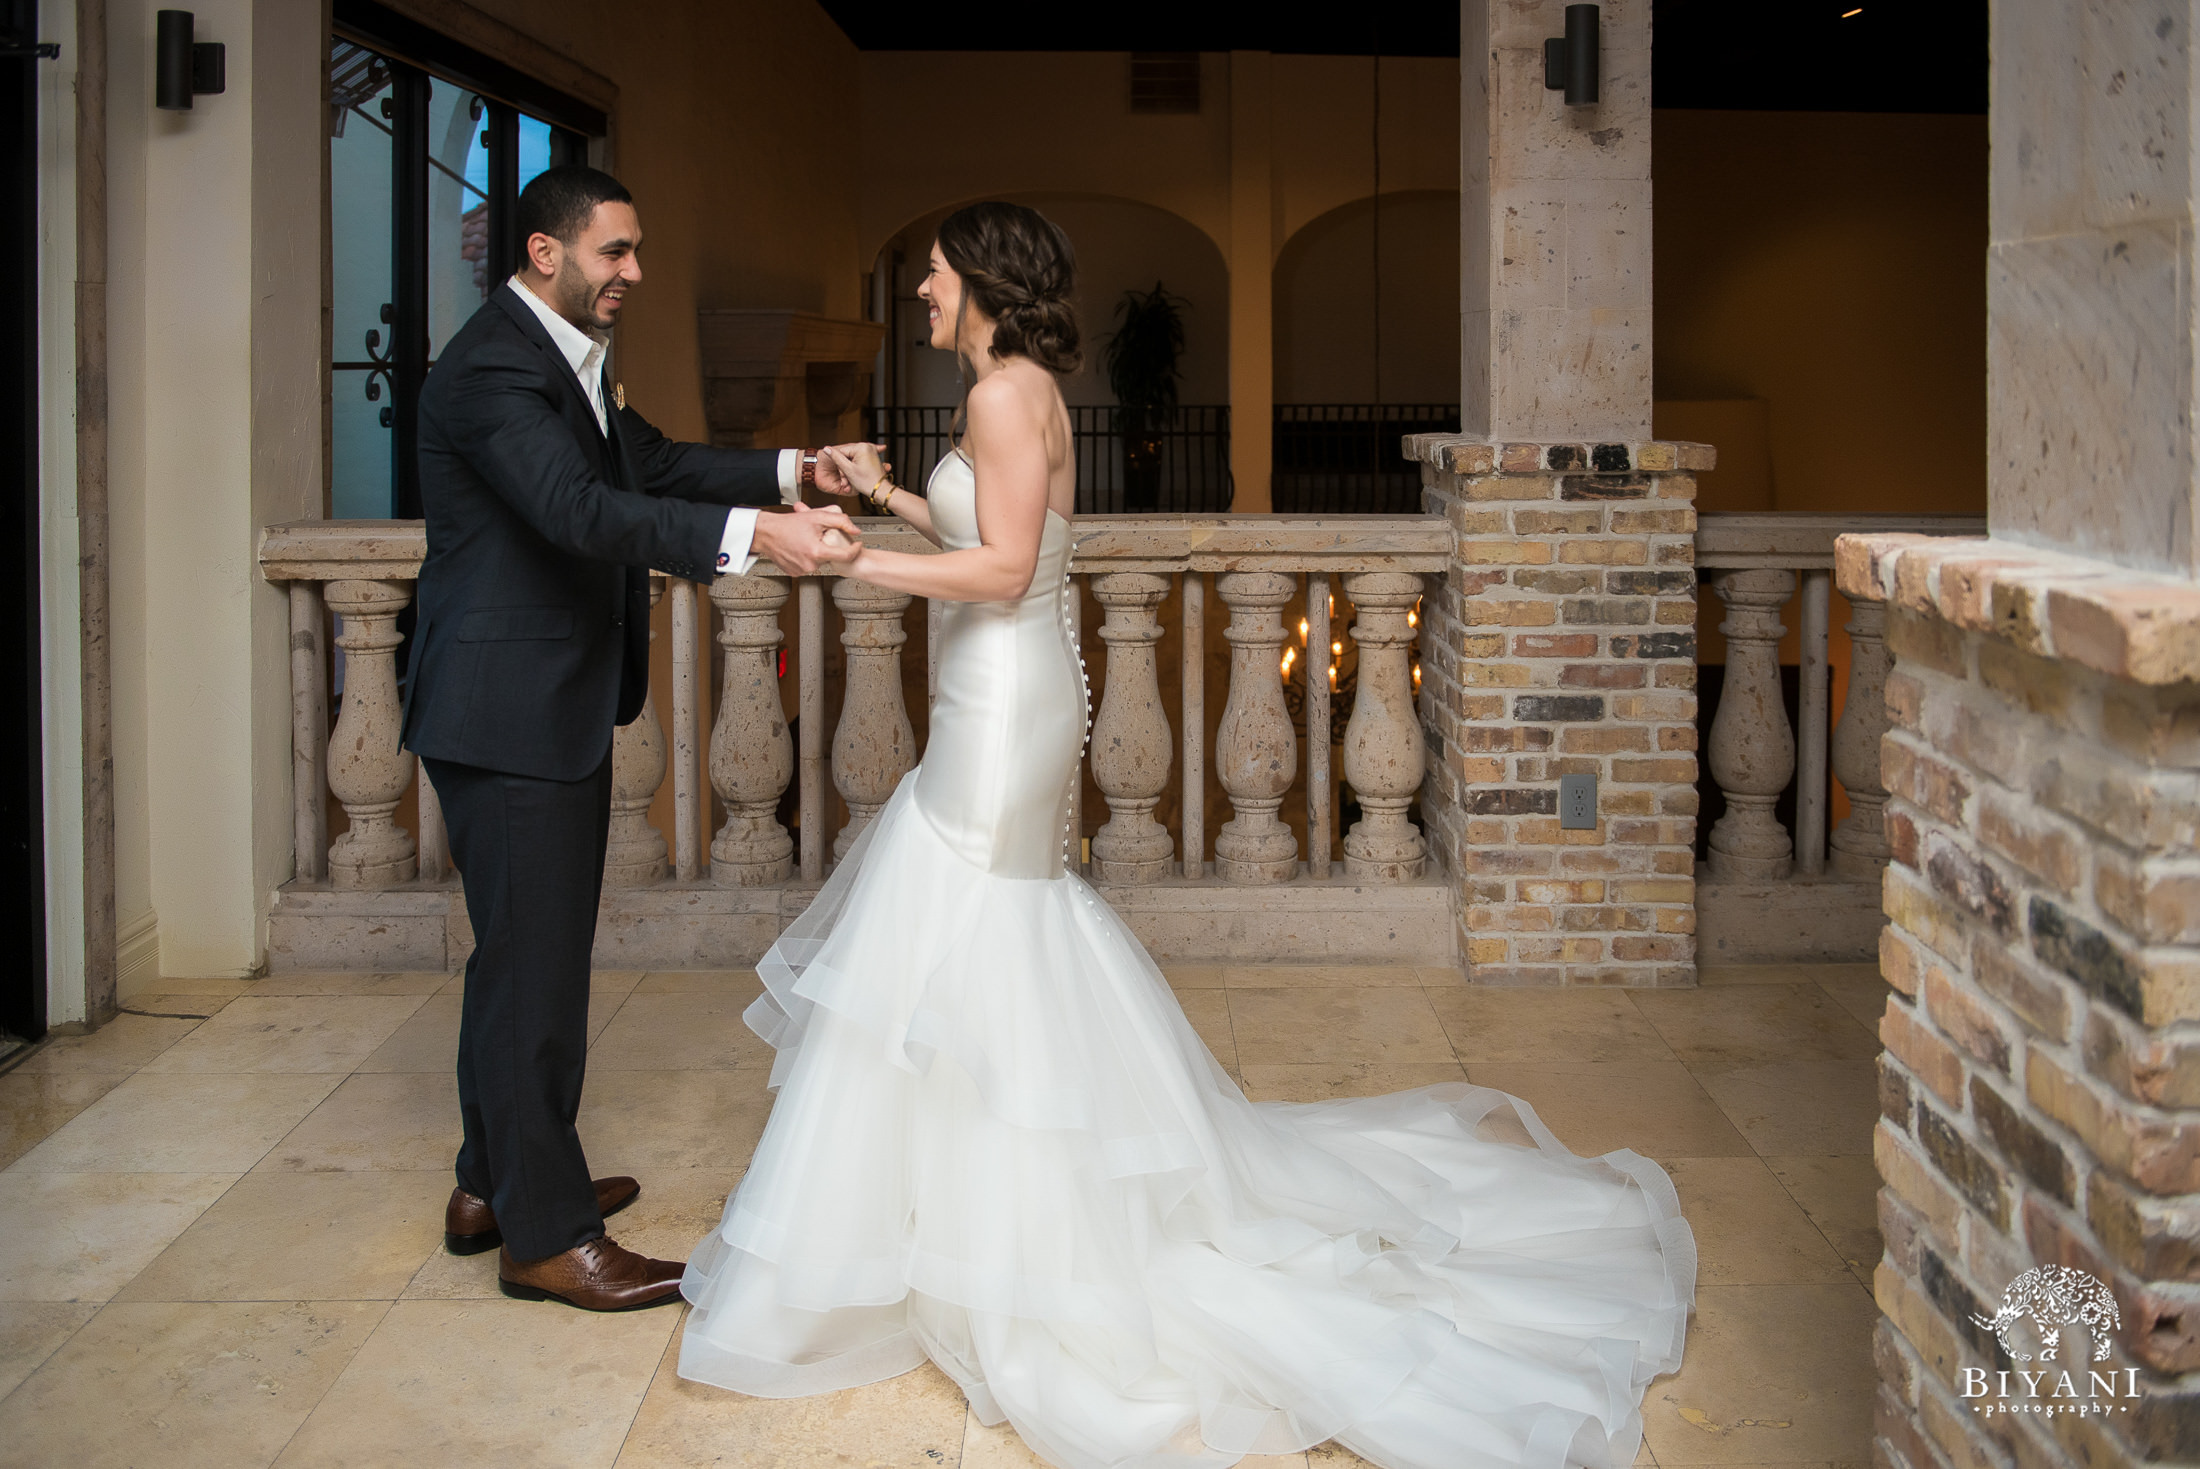 https://www.biyaniphoto.com/wp-content/uploads/2019/03/013_Houston_Fusion_Egyptian_Wedding_Photos_First_Look_Couples_Portraits_024.jpg